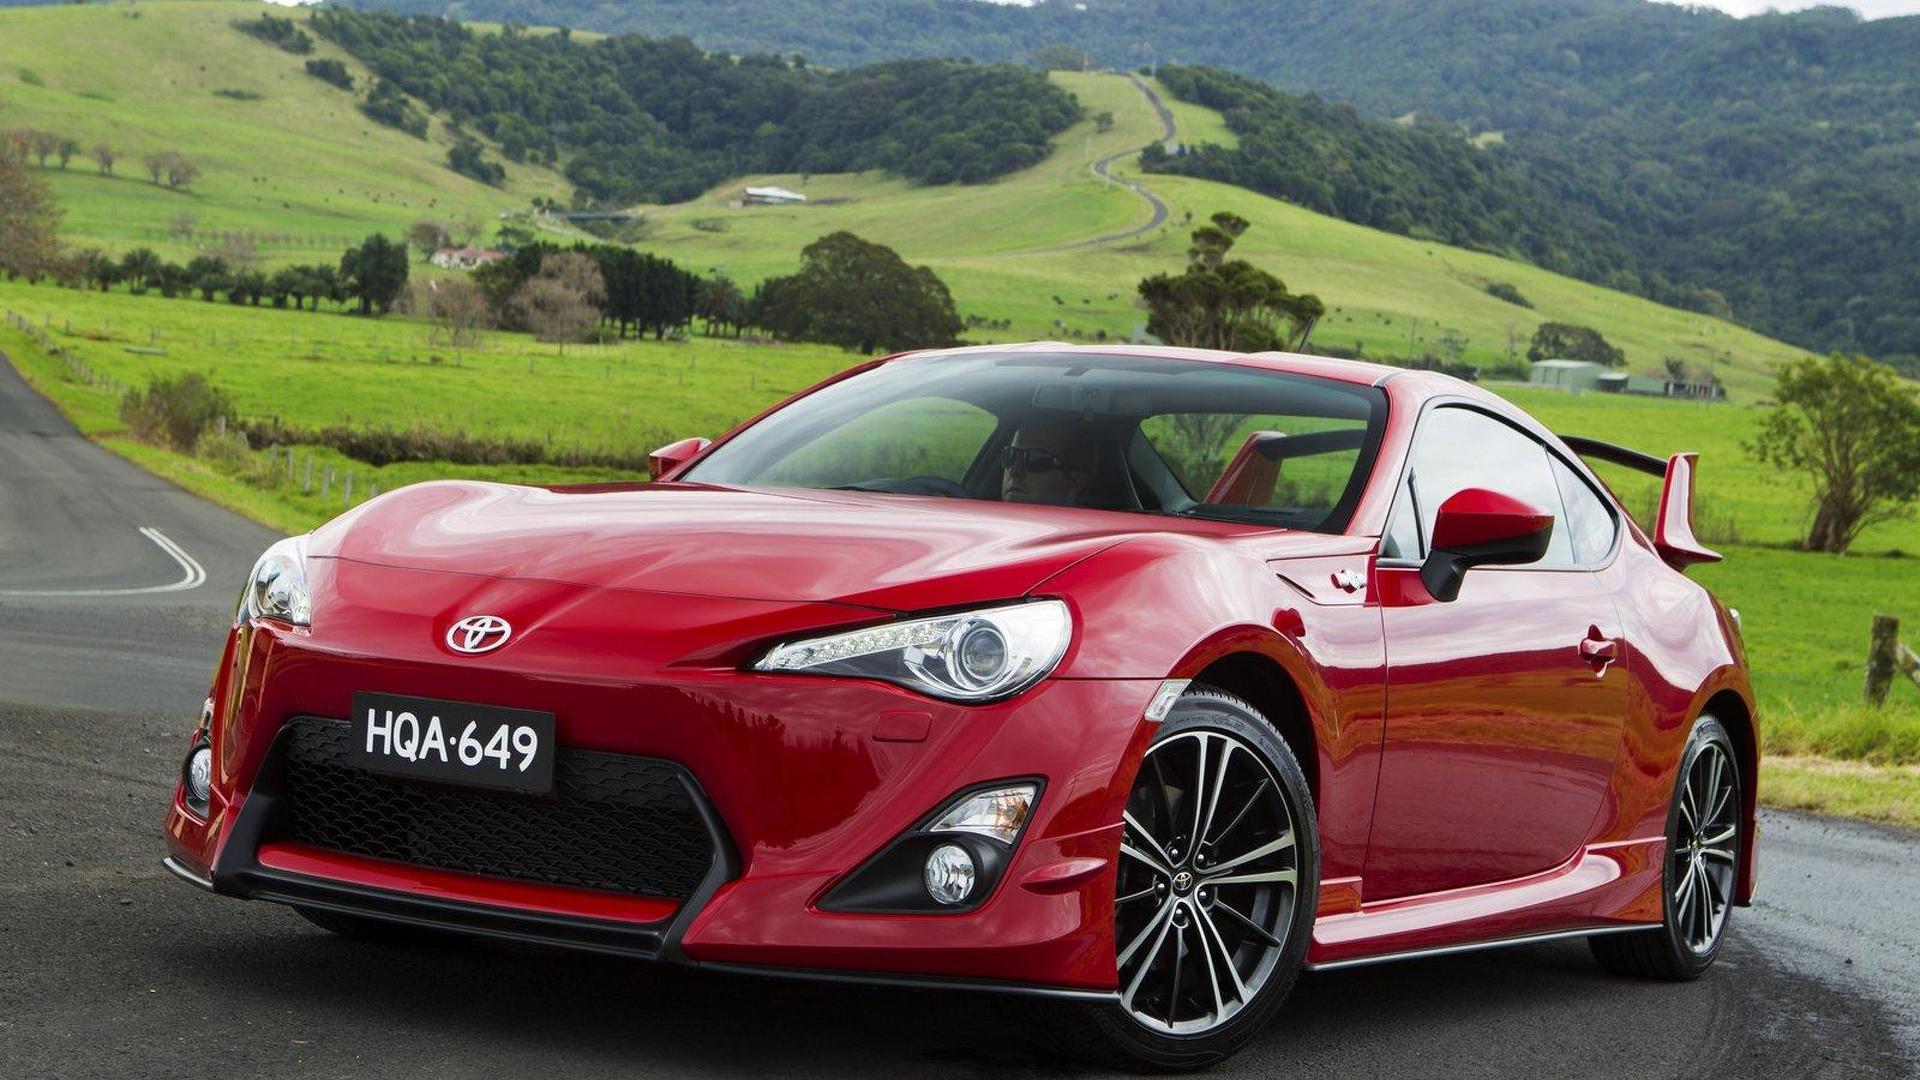 TRD Considering A Supercharger Kit For The GT 86 / FR S